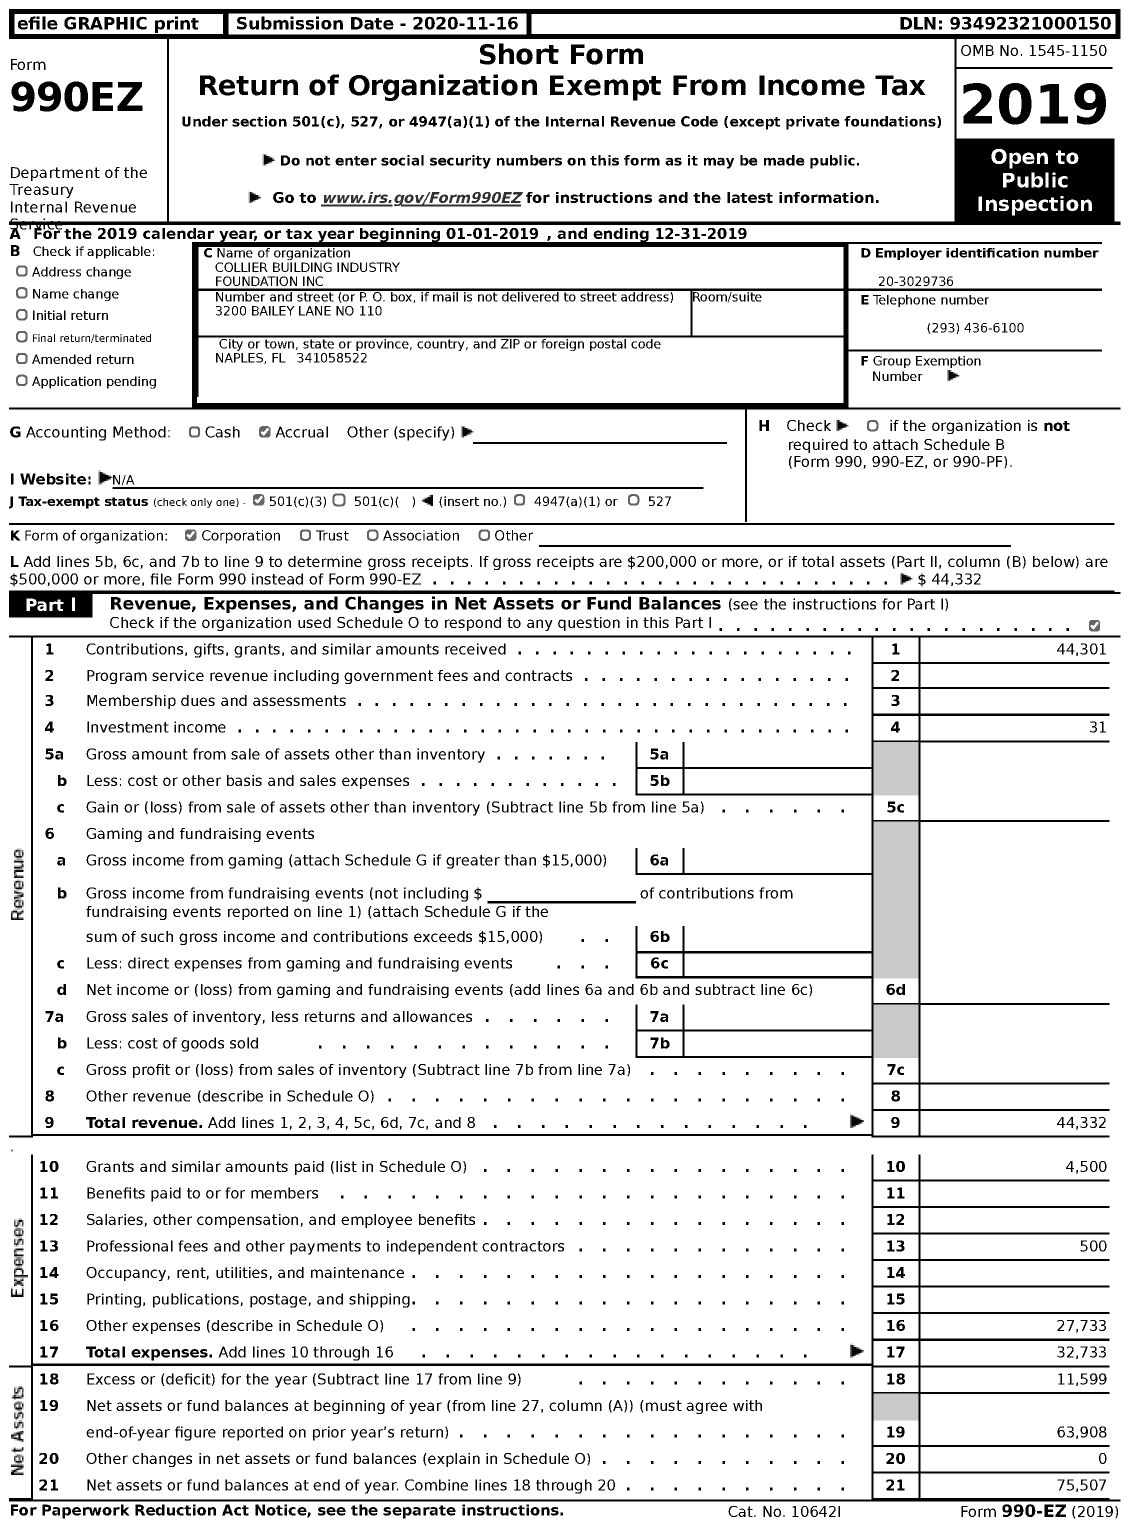 Image of first page of 2019 Form 990EZ for Collier Building Industry Foundation